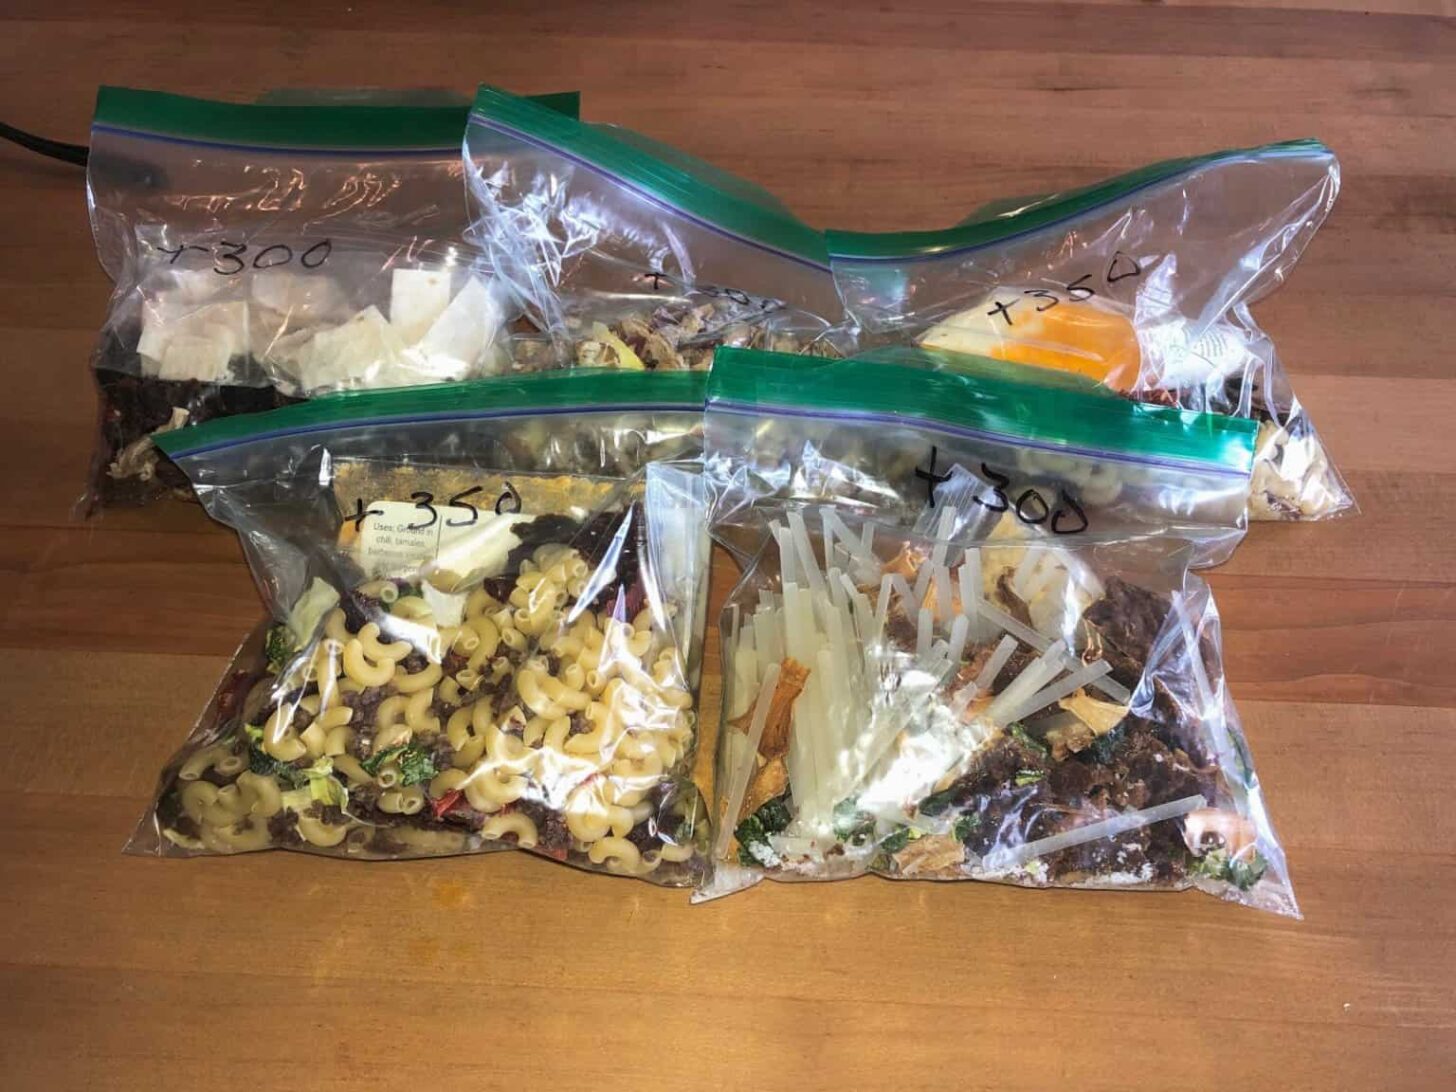 Bags of dried backpacking food sitting on a kitchen table.